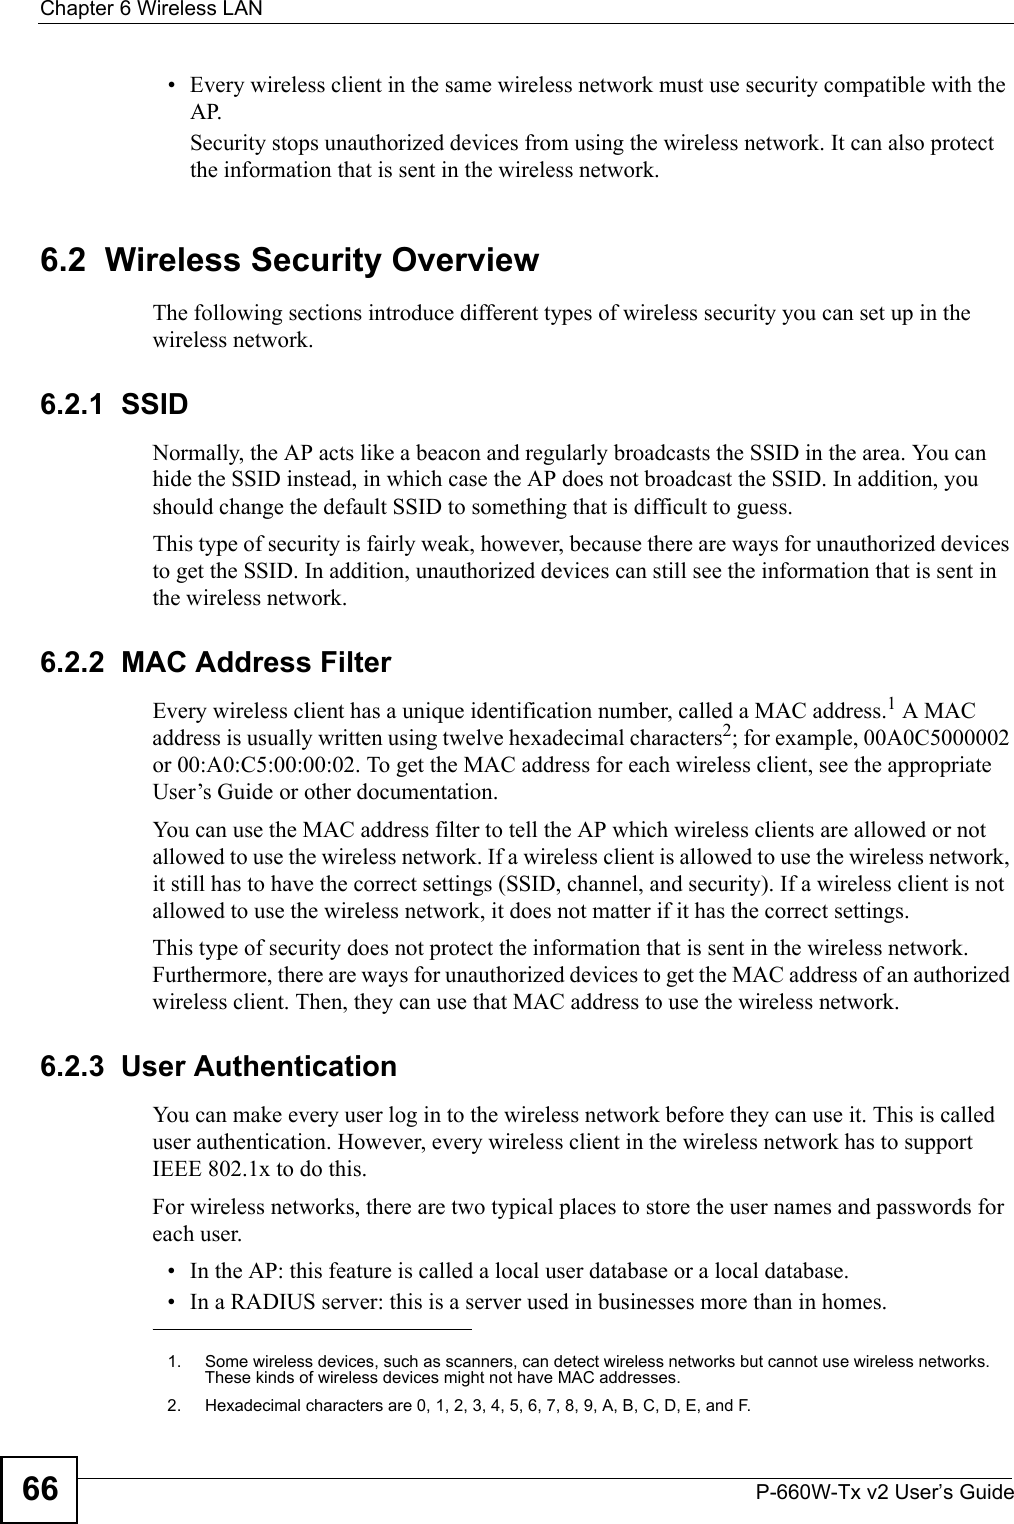 Chapter 6 Wireless LANP-660W-Tx v2 User’s Guide66• Every wireless client in the same wireless network must use security compatible with the AP.Security stops unauthorized devices from using the wireless network. It can also protect the information that is sent in the wireless network.6.2  Wireless Security OverviewThe following sections introduce different types of wireless security you can set up in the wireless network.6.2.1  SSIDNormally, the AP acts like a beacon and regularly broadcasts the SSID in the area. You can hide the SSID instead, in which case the AP does not broadcast the SSID. In addition, you should change the default SSID to something that is difficult to guess.This type of security is fairly weak, however, because there are ways for unauthorized devices to get the SSID. In addition, unauthorized devices can still see the information that is sent in the wireless network.6.2.2  MAC Address FilterEvery wireless client has a unique identification number, called a MAC address.1 A MAC address is usually written using twelve hexadecimal characters2; for example, 00A0C5000002 or 00:A0:C5:00:00:02. To get the MAC address for each wireless client, see the appropriate User’s Guide or other documentation.You can use the MAC address filter to tell the AP which wireless clients are allowed or not allowed to use the wireless network. If a wireless client is allowed to use the wireless network, it still has to have the correct settings (SSID, channel, and security). If a wireless client is not allowed to use the wireless network, it does not matter if it has the correct settings.This type of security does not protect the information that is sent in the wireless network. Furthermore, there are ways for unauthorized devices to get the MAC address of an authorized wireless client. Then, they can use that MAC address to use the wireless network.6.2.3  User AuthenticationYou can make every user log in to the wireless network before they can use it. This is called user authentication. However, every wireless client in the wireless network has to support IEEE 802.1x to do this.For wireless networks, there are two typical places to store the user names and passwords for each user.• In the AP: this feature is called a local user database or a local database.• In a RADIUS server: this is a server used in businesses more than in homes.1. Some wireless devices, such as scanners, can detect wireless networks but cannot use wireless networks. These kinds of wireless devices might not have MAC addresses.2. Hexadecimal characters are 0, 1, 2, 3, 4, 5, 6, 7, 8, 9, A, B, C, D, E, and F.